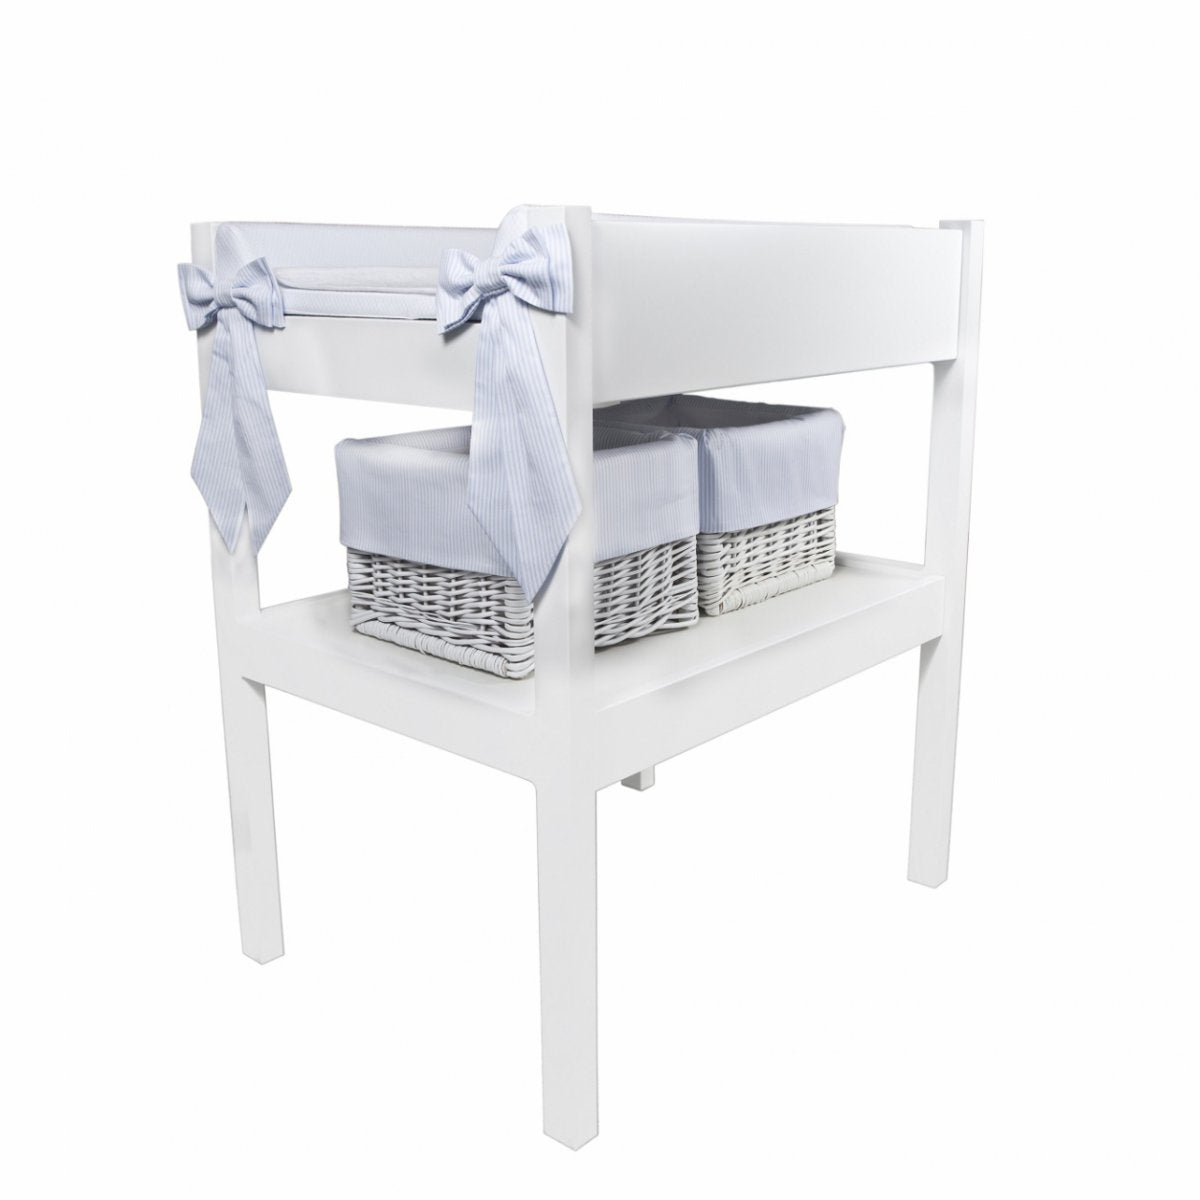 Changing Table with Azure Equipment